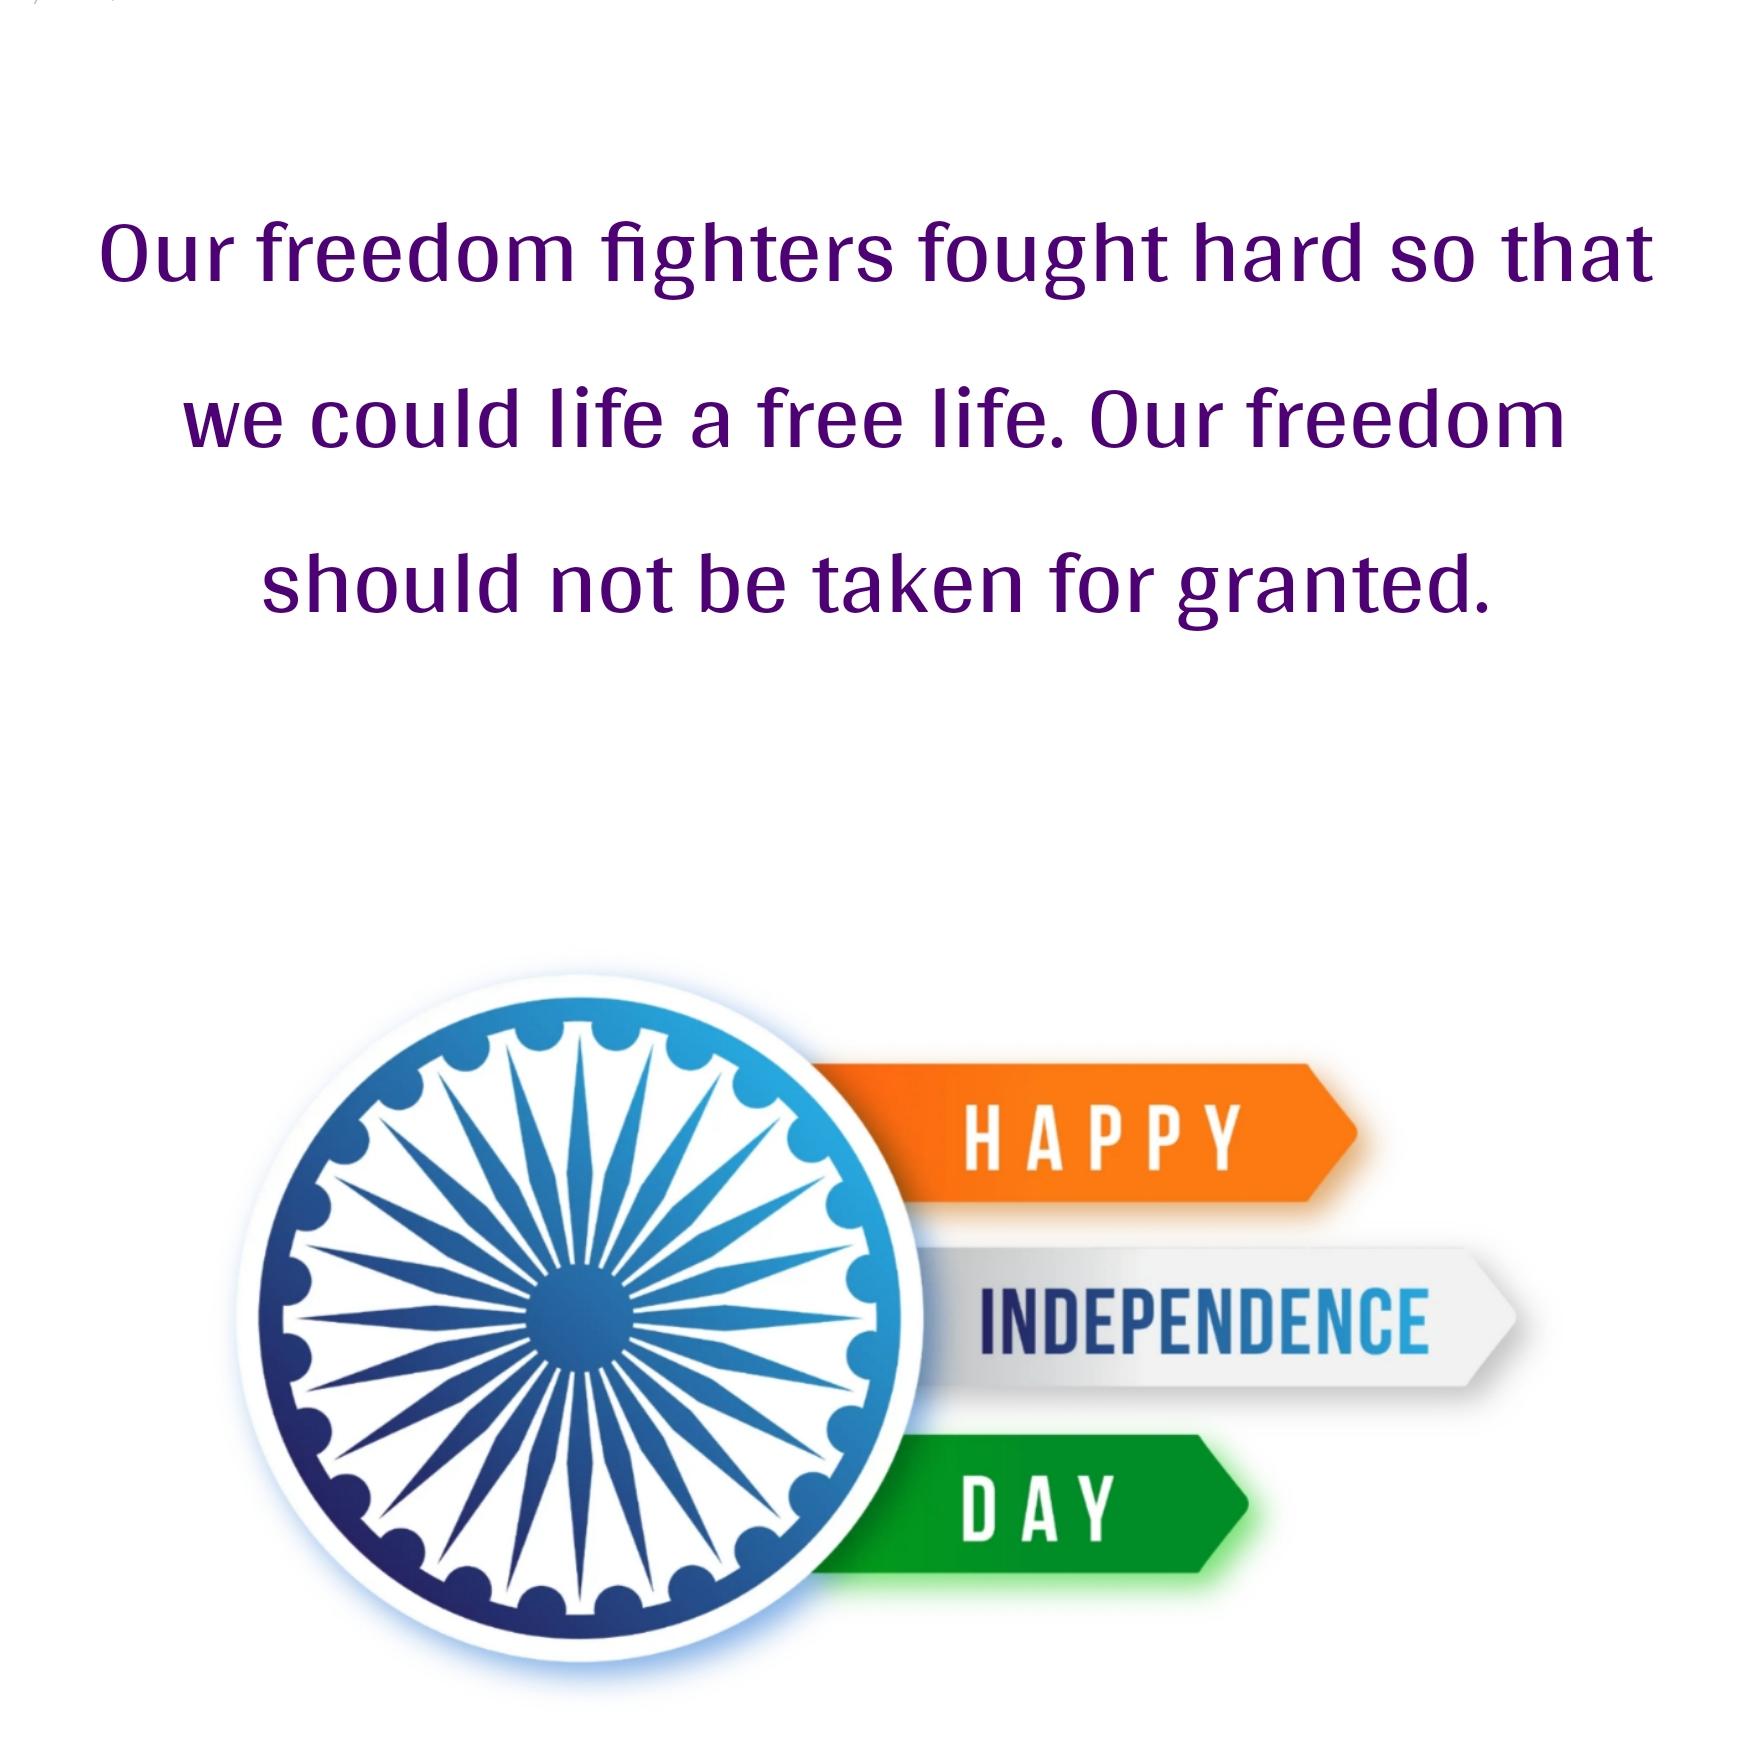 Our freedom fighters fought hard so that we could life a free life